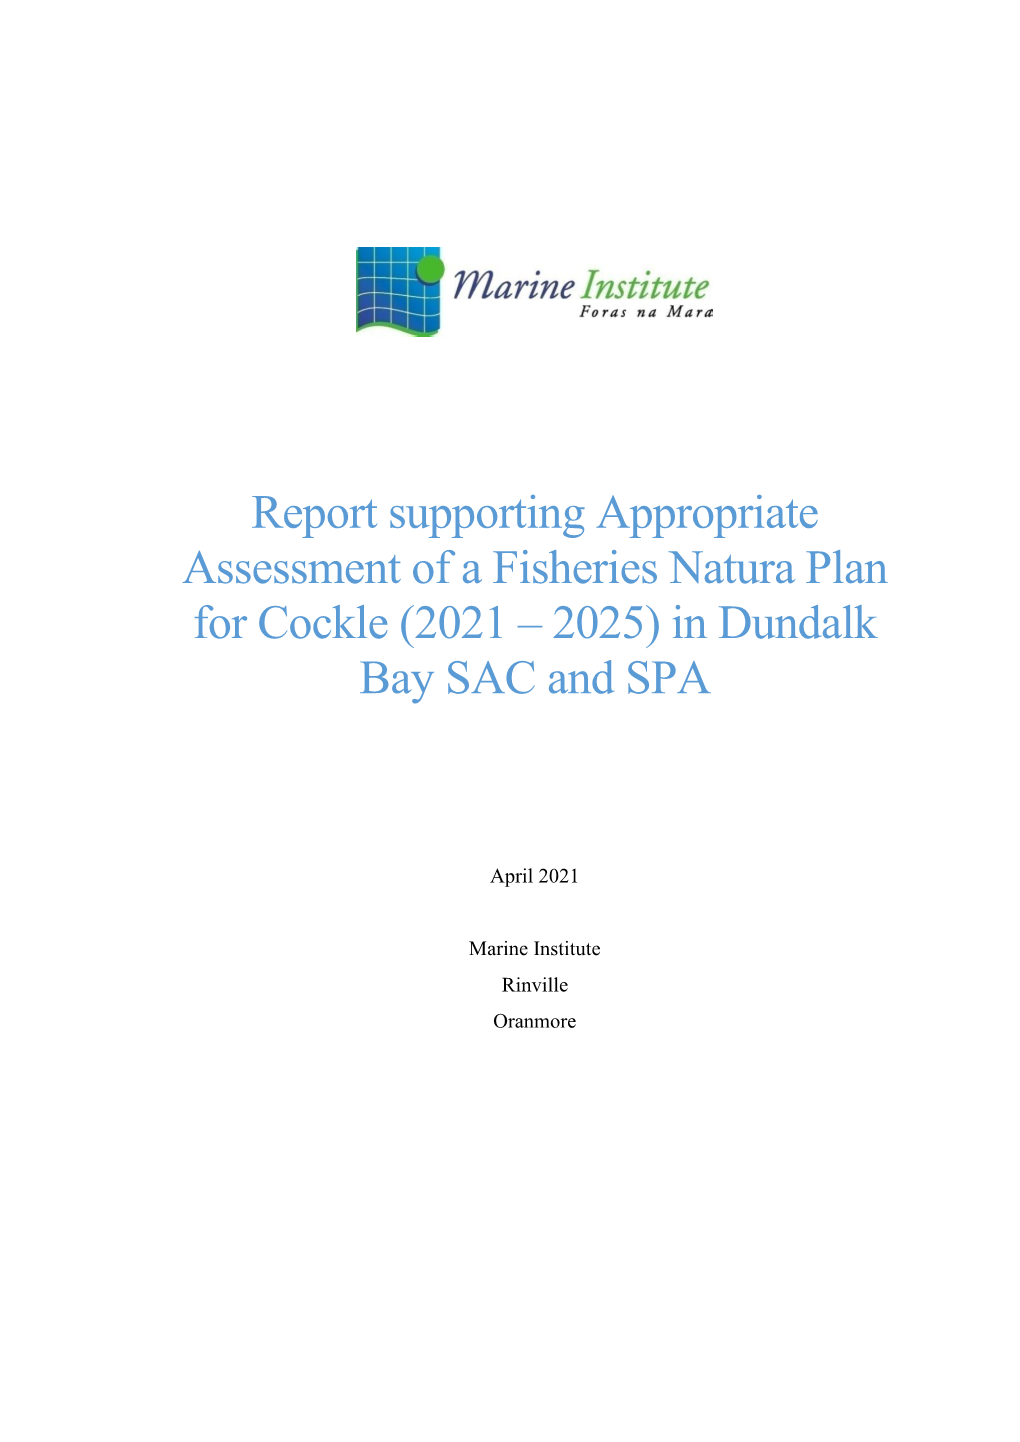 Report Supporting Appropriate Assessment of a Fisheries Natura Plan for Cockle (2021 – 2025) in Dundalk Bay SAC and SPA